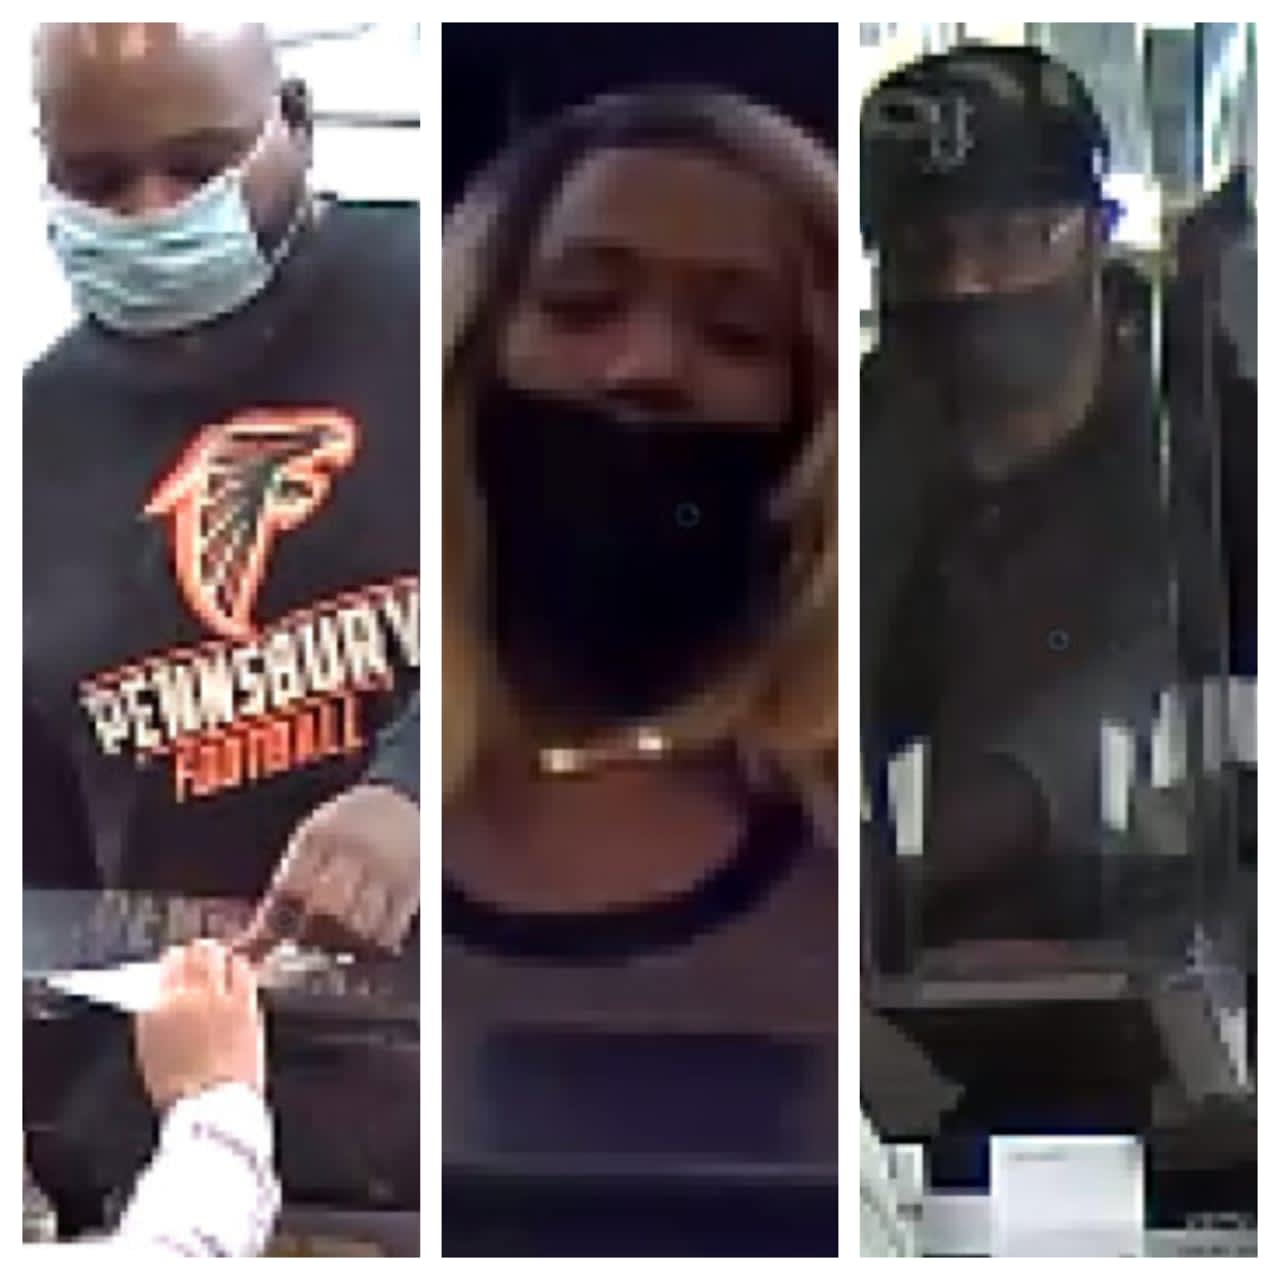 Authorities are seeking the public's help identifying three individuals wanted in a $9,000 check fraud case spanning Pennsylvania and New Jersey.